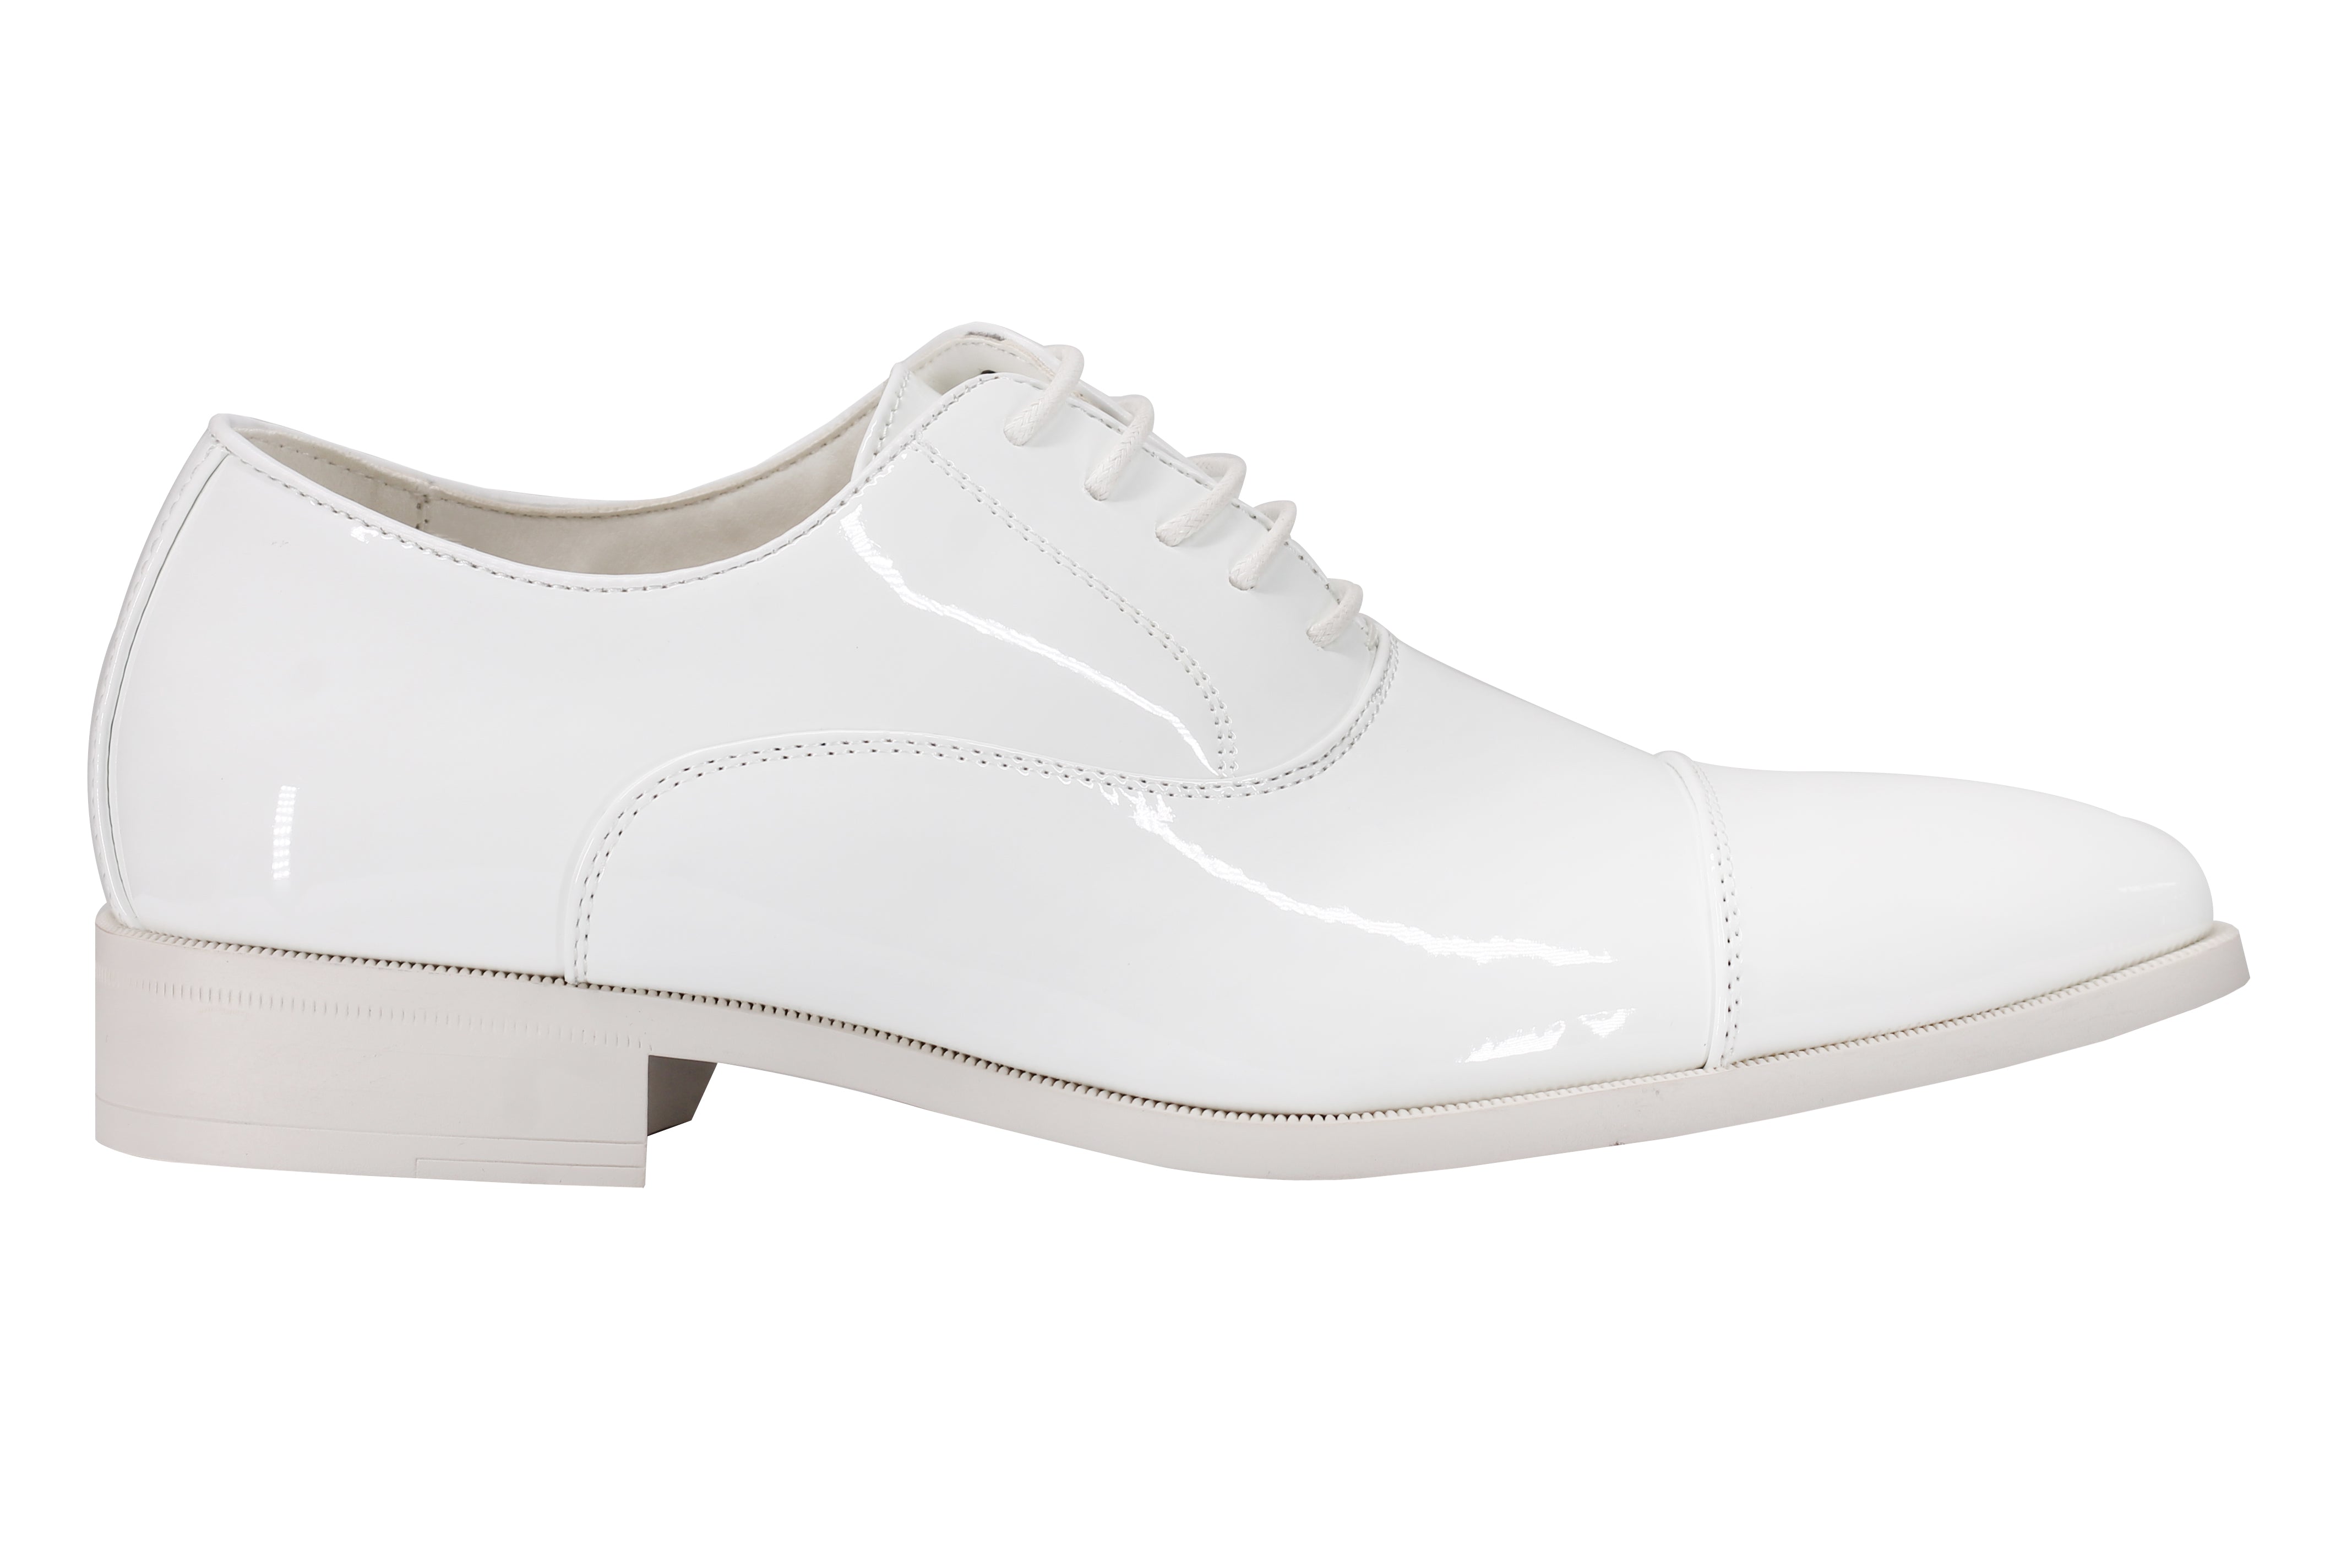 WHITE OXFORD LACEUP SHOES